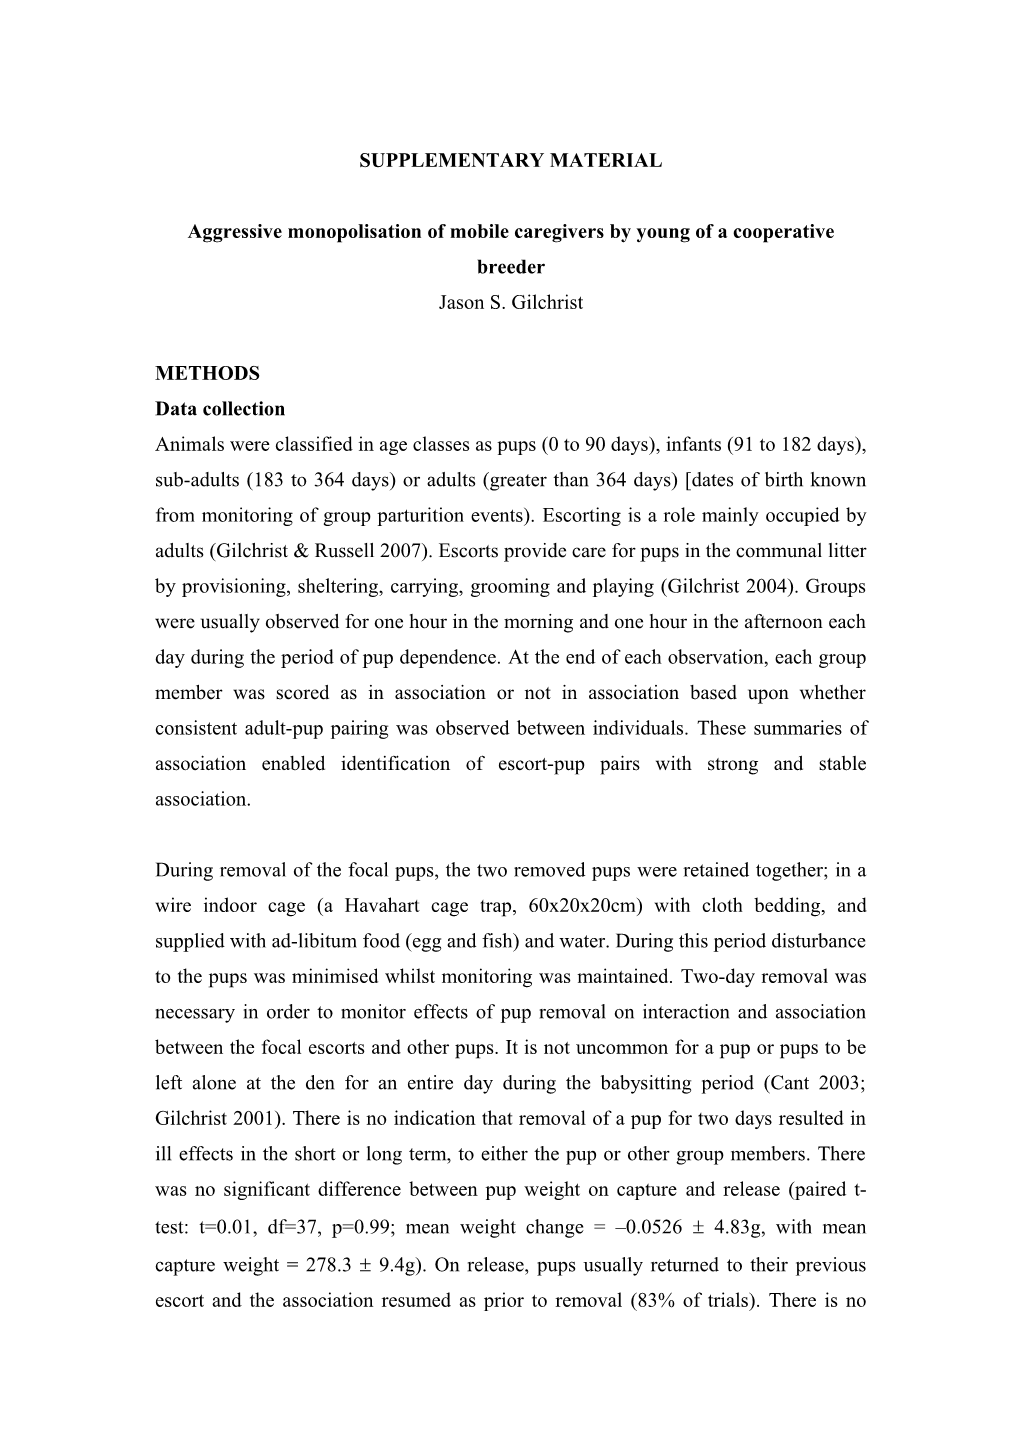 Aggressive Monopolisation of Mobile Caregivers by Young of a Cooperative Breeder